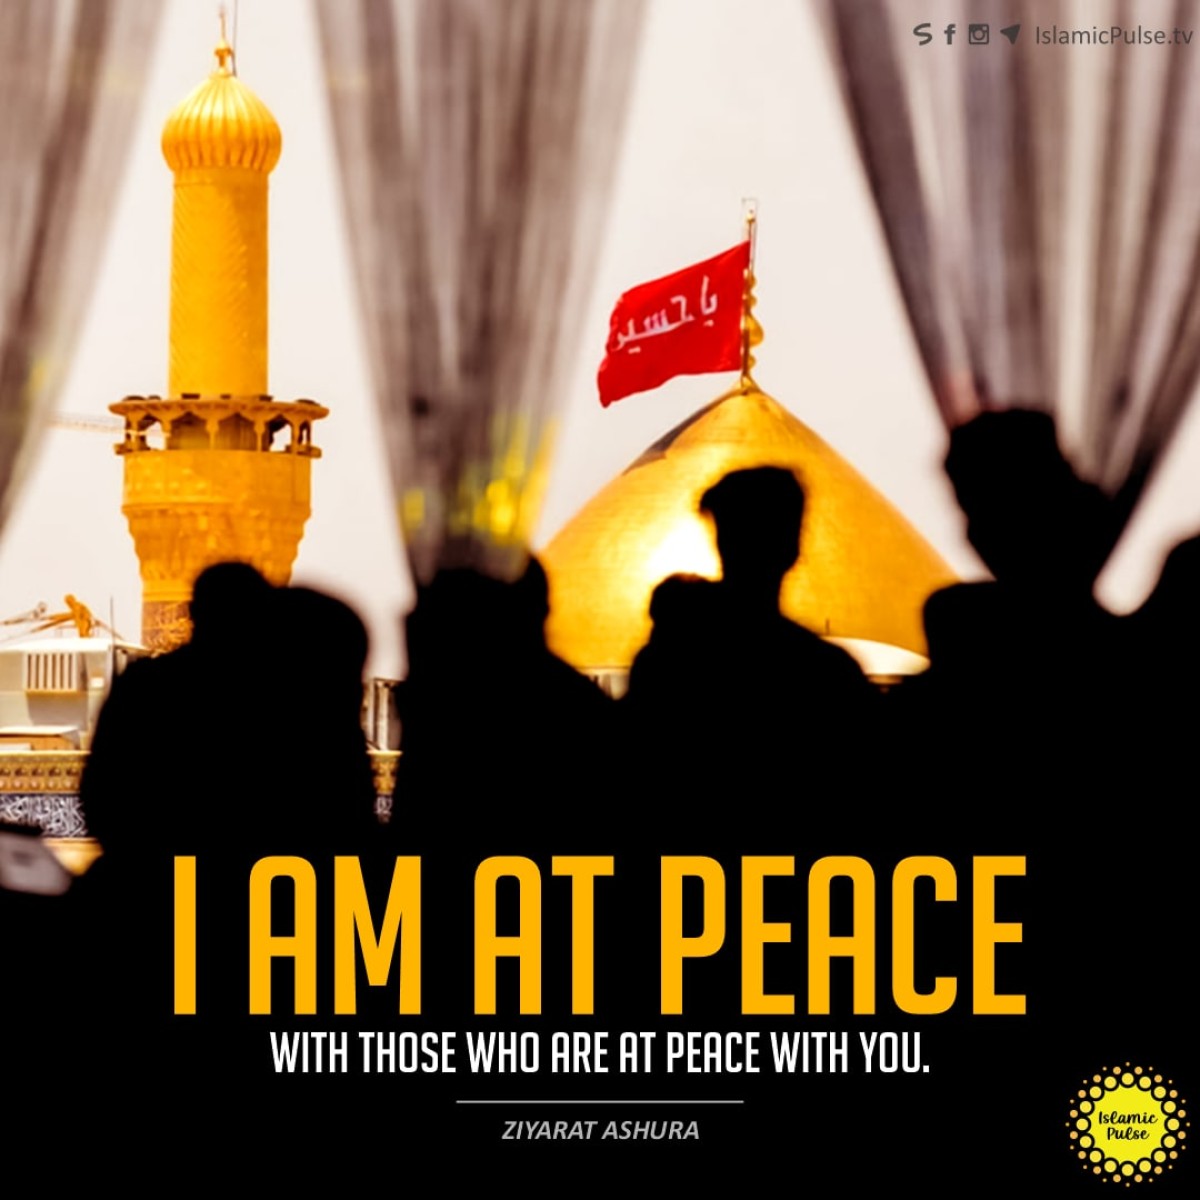 "I am at peace with those who are at peace with you."